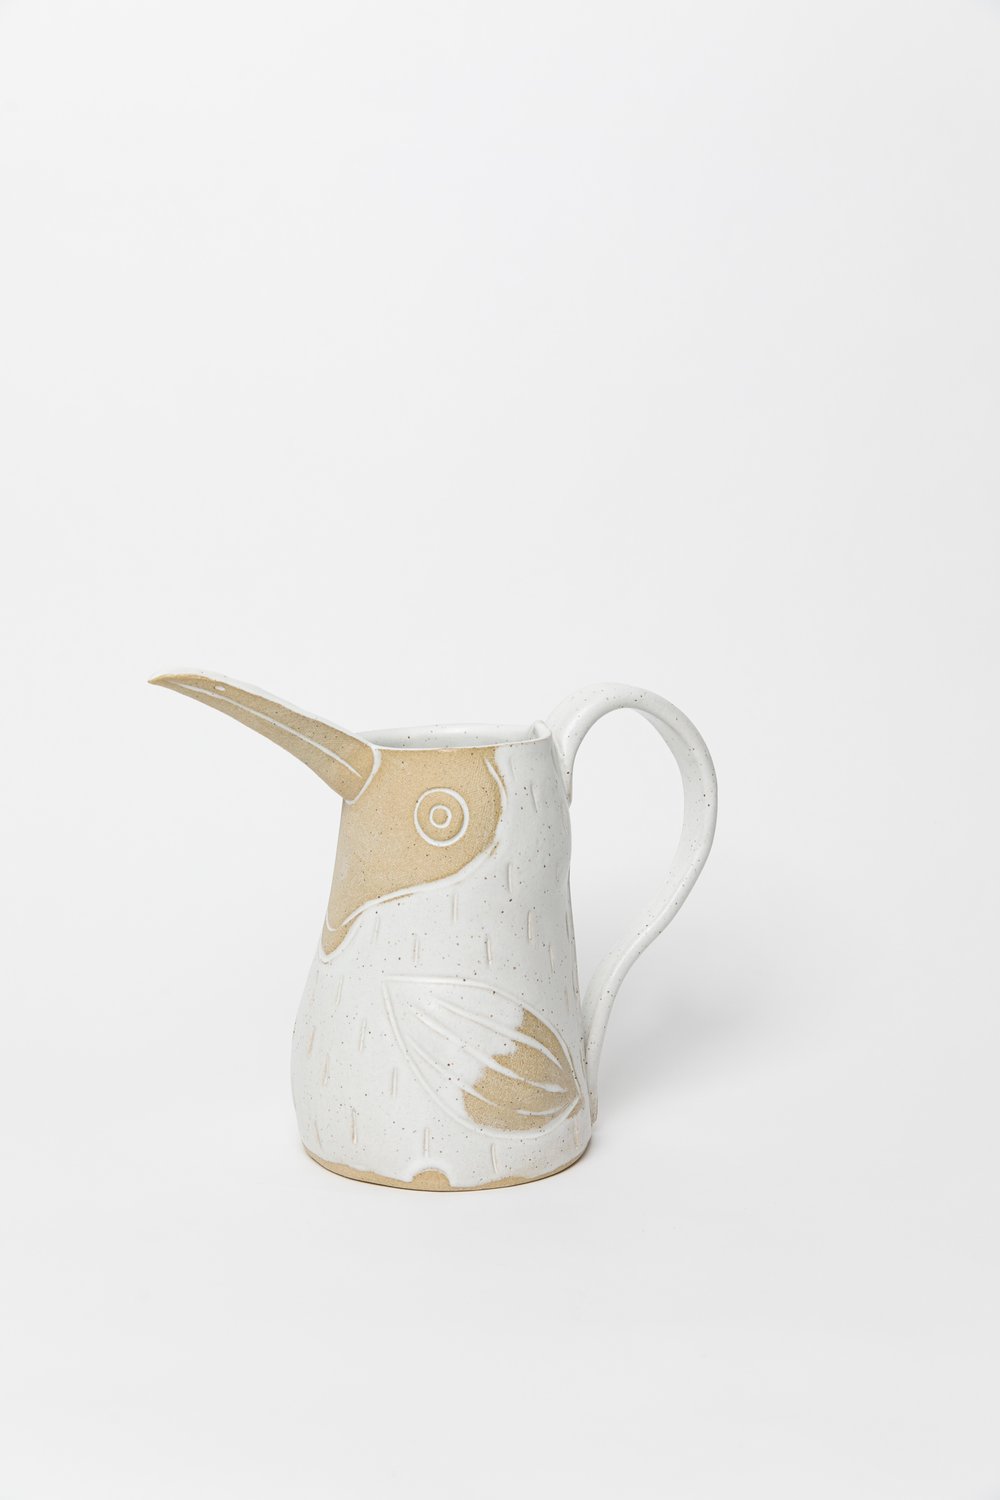 Image of Large Family size Matte White Speckled Toucan Pitcher 